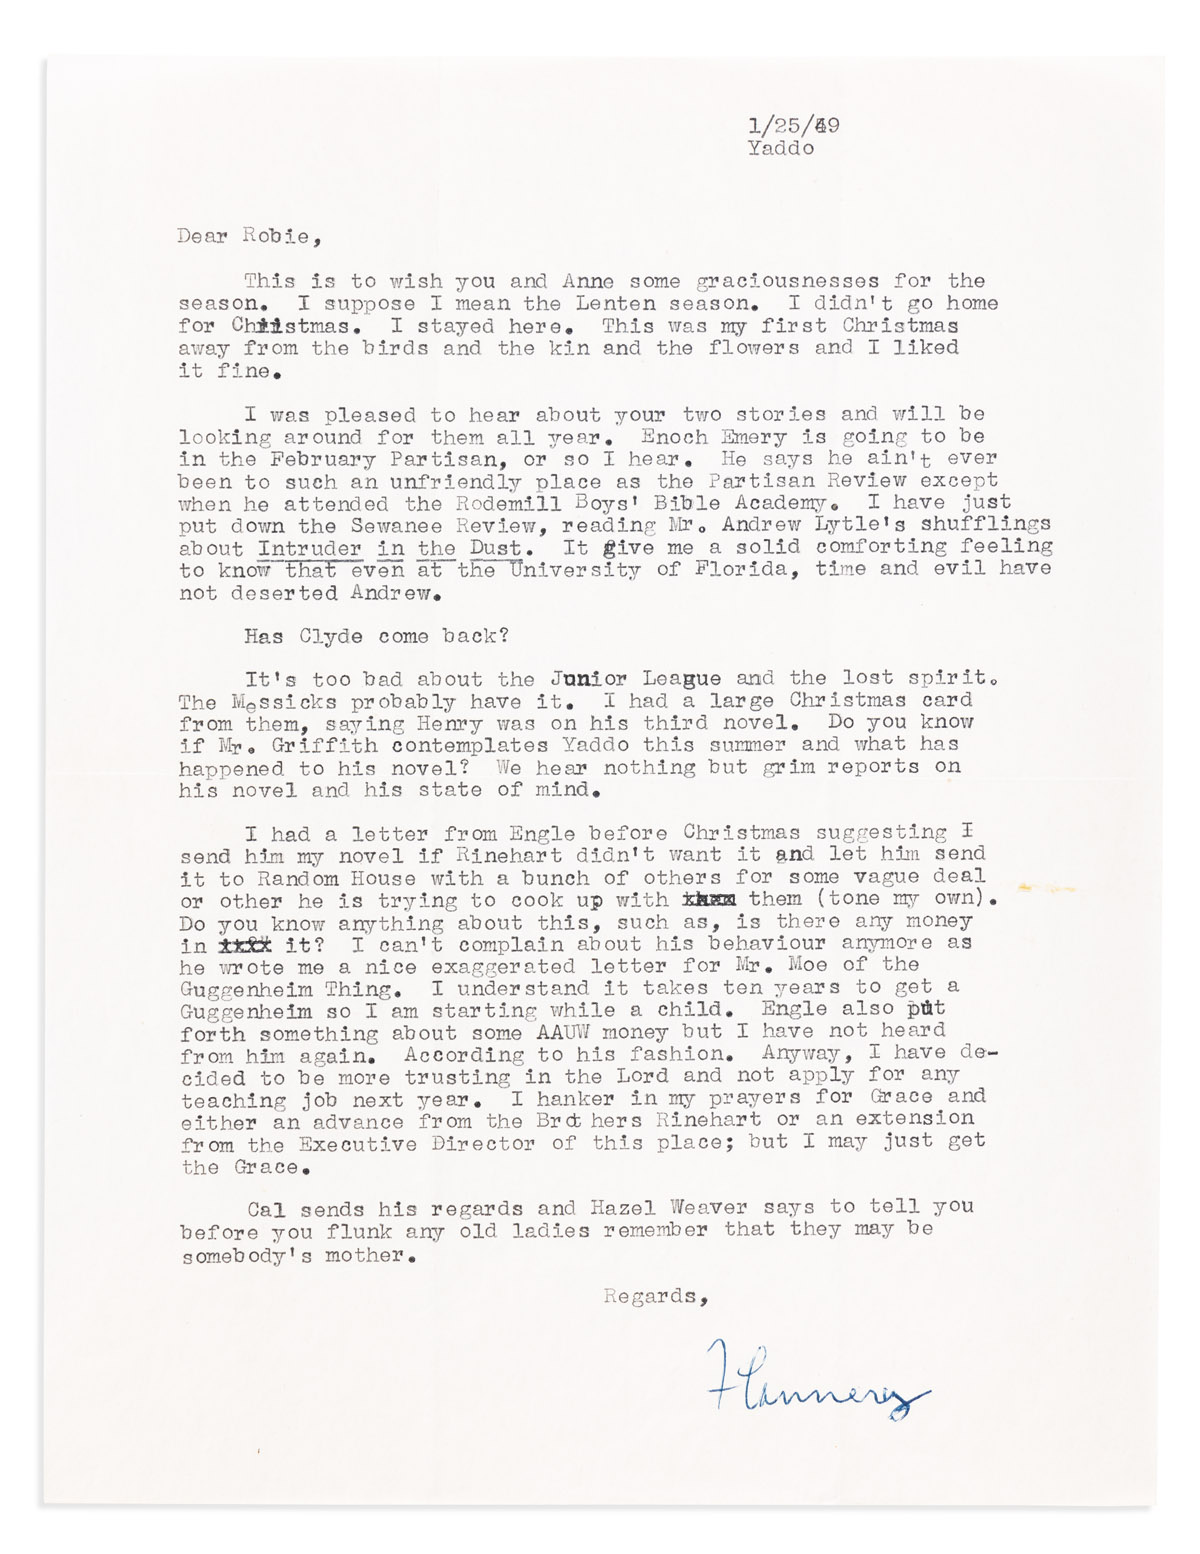 OCONNOR, FLANNERY. Two Typed Letters Signed, Flannery, to Robie Macauley (Dear Robie).